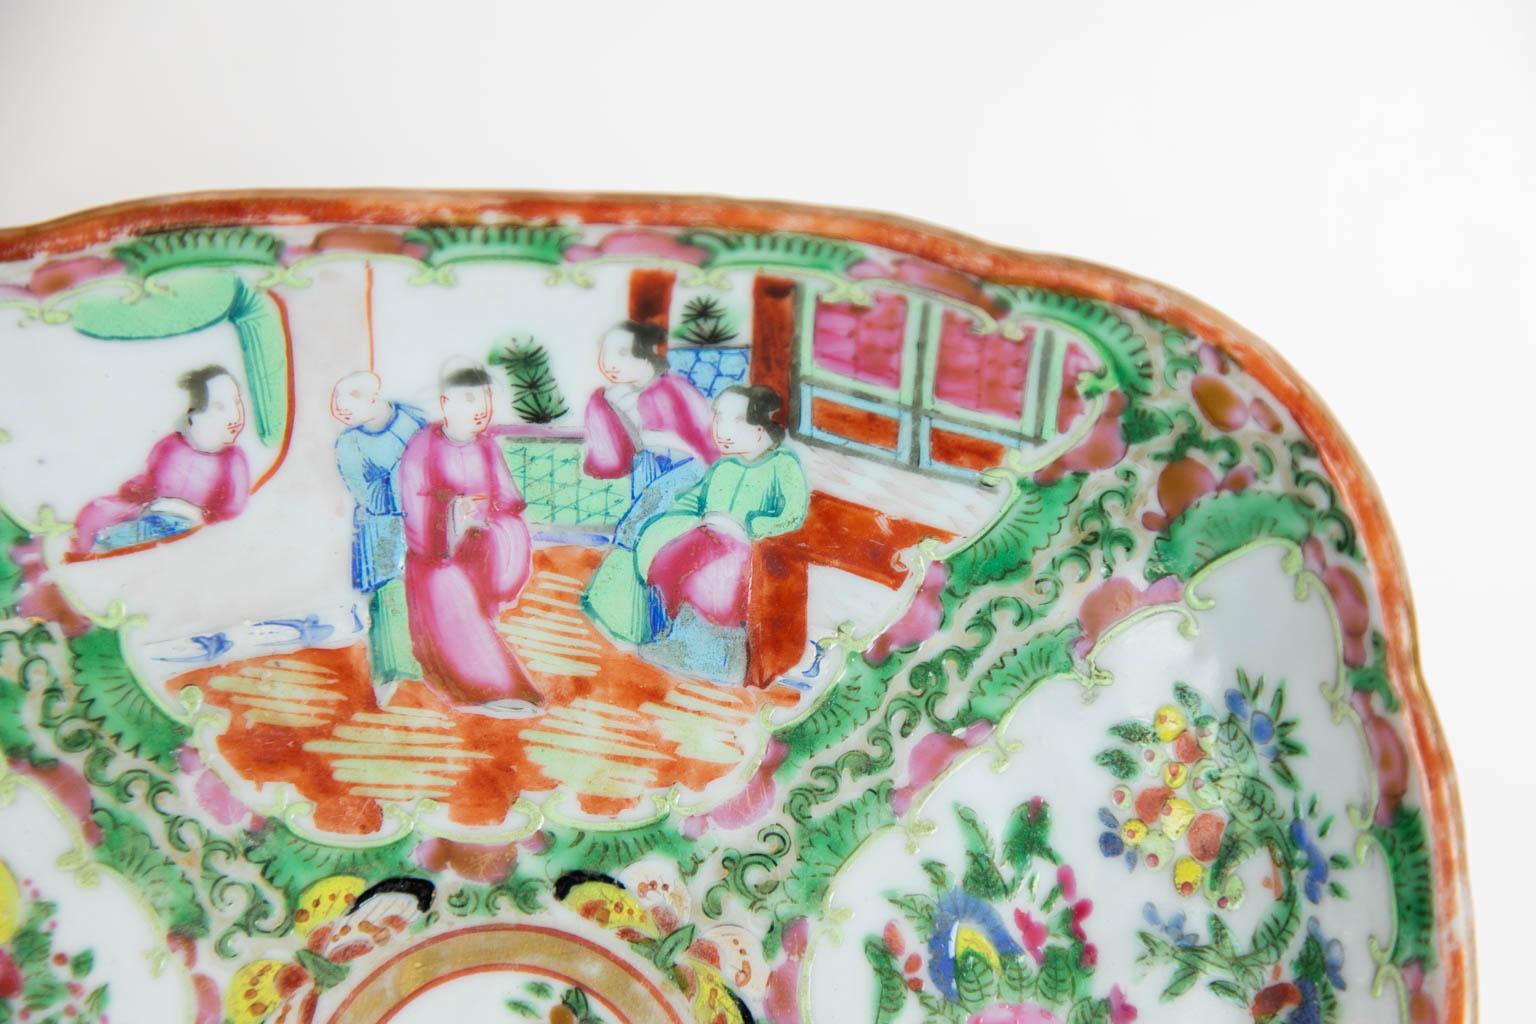 This Chinese dish is in mint condition. There are four cartouches depicting Mandarin figures, birds, fruit, and flowers.